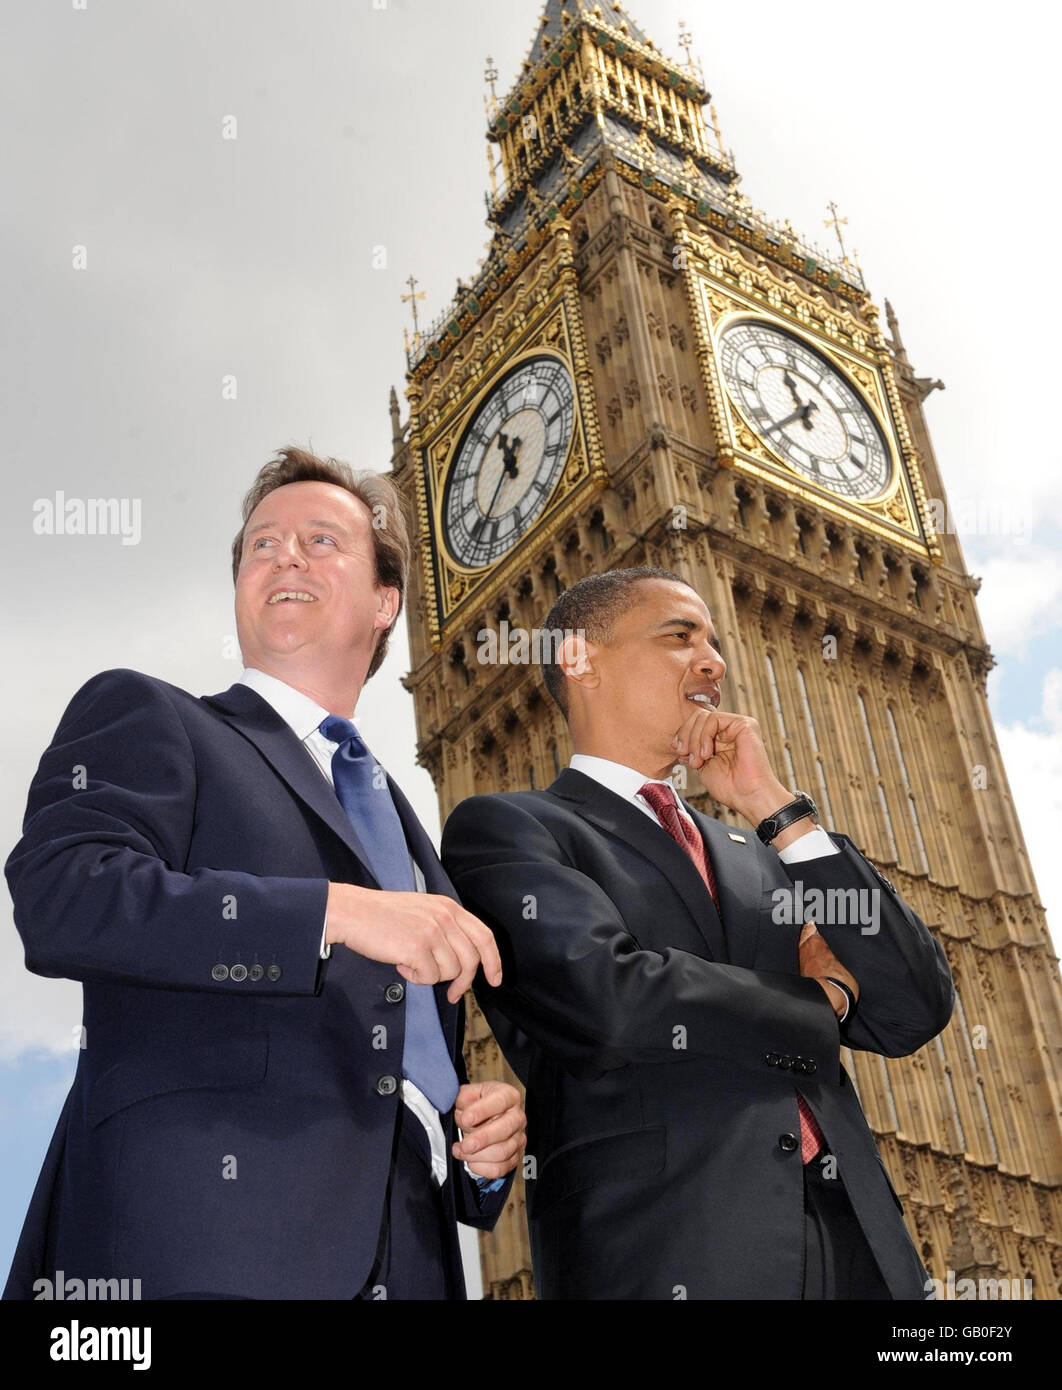 US senator Barack Obama (right) meets with Conservative Party leader David Cameron outside the Houses of Parliament in London. Stock Photo